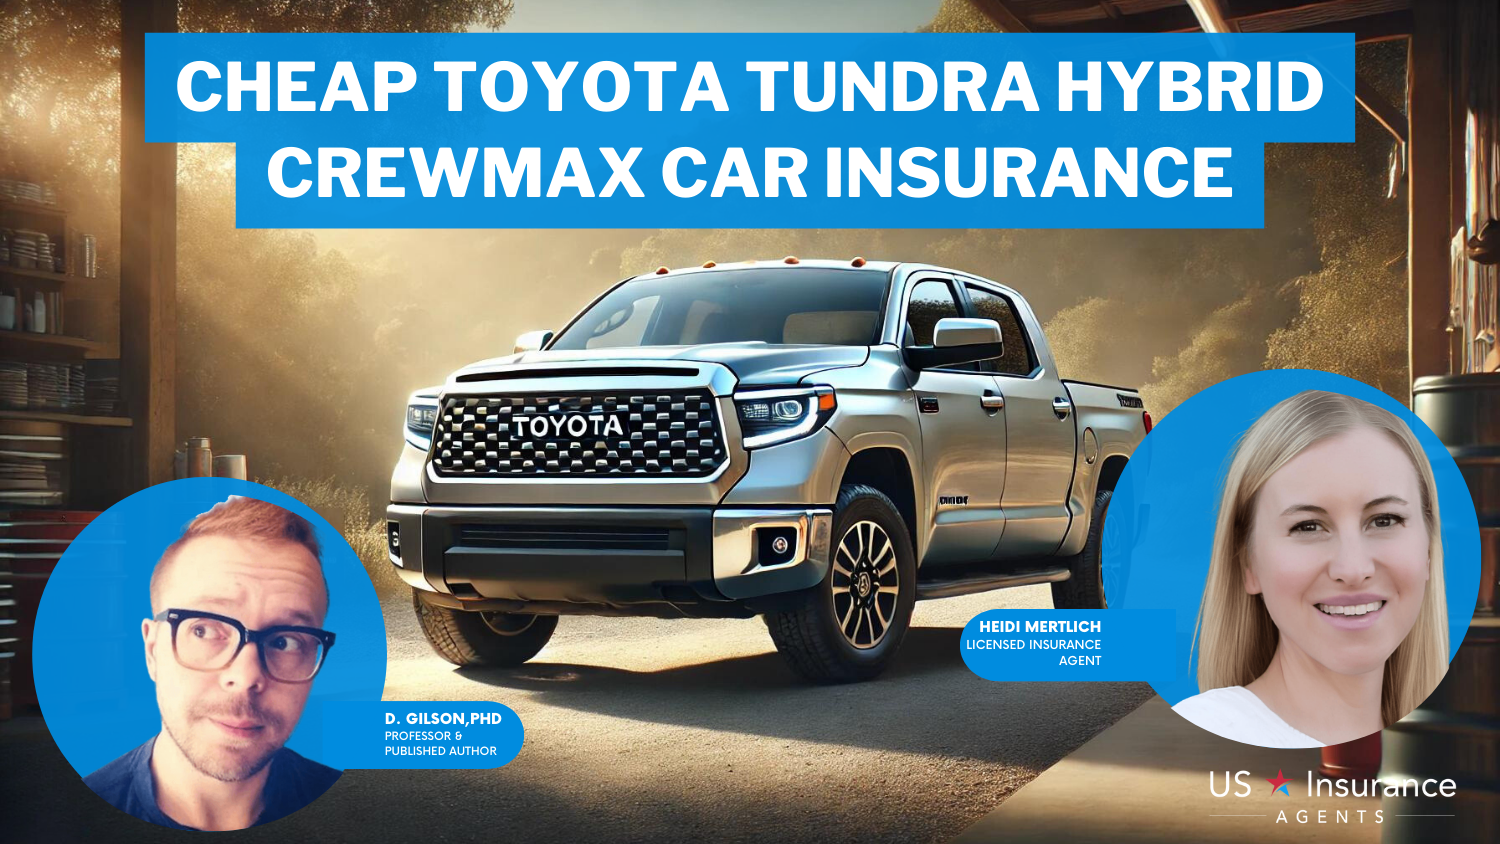 Cheap Toyota Tundra Hybrid CrewMax Car Insurance: Farmers, Nationwide, and American Family